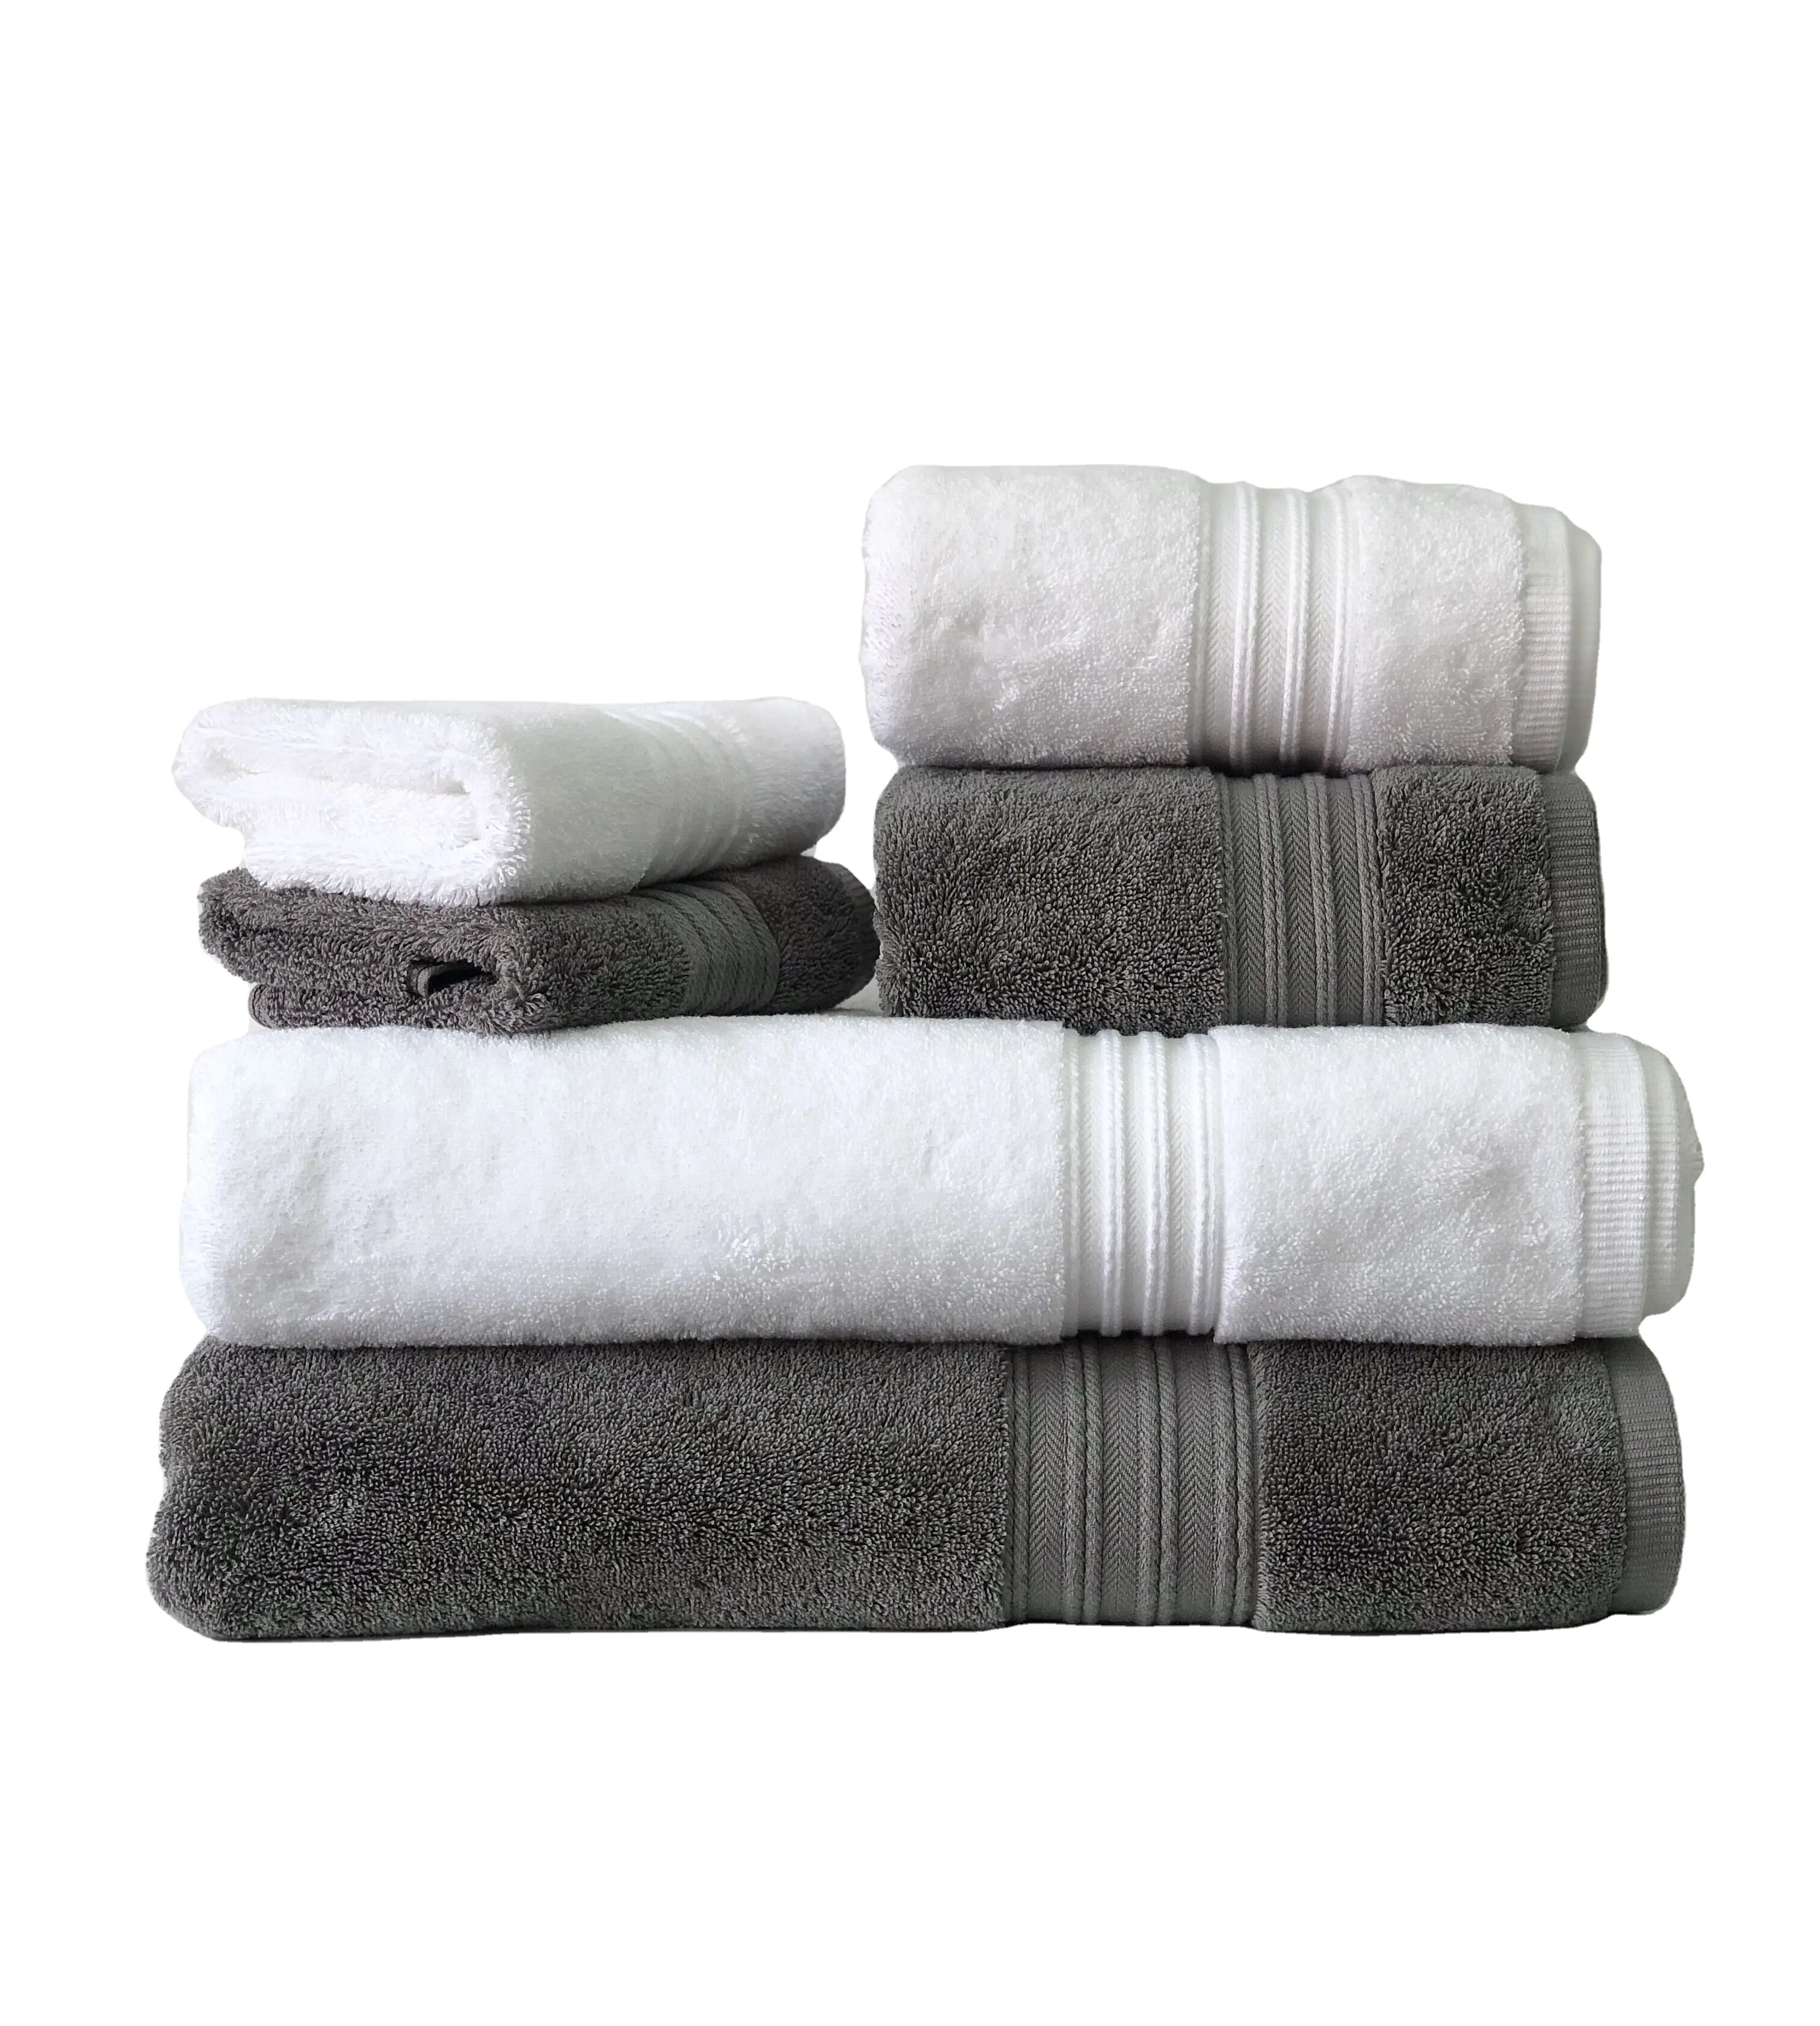 High Quality Custom Embroidered 100% Cotton Hotel bath hand square Towel Super Soft and Absorbent Cotton bath towel set